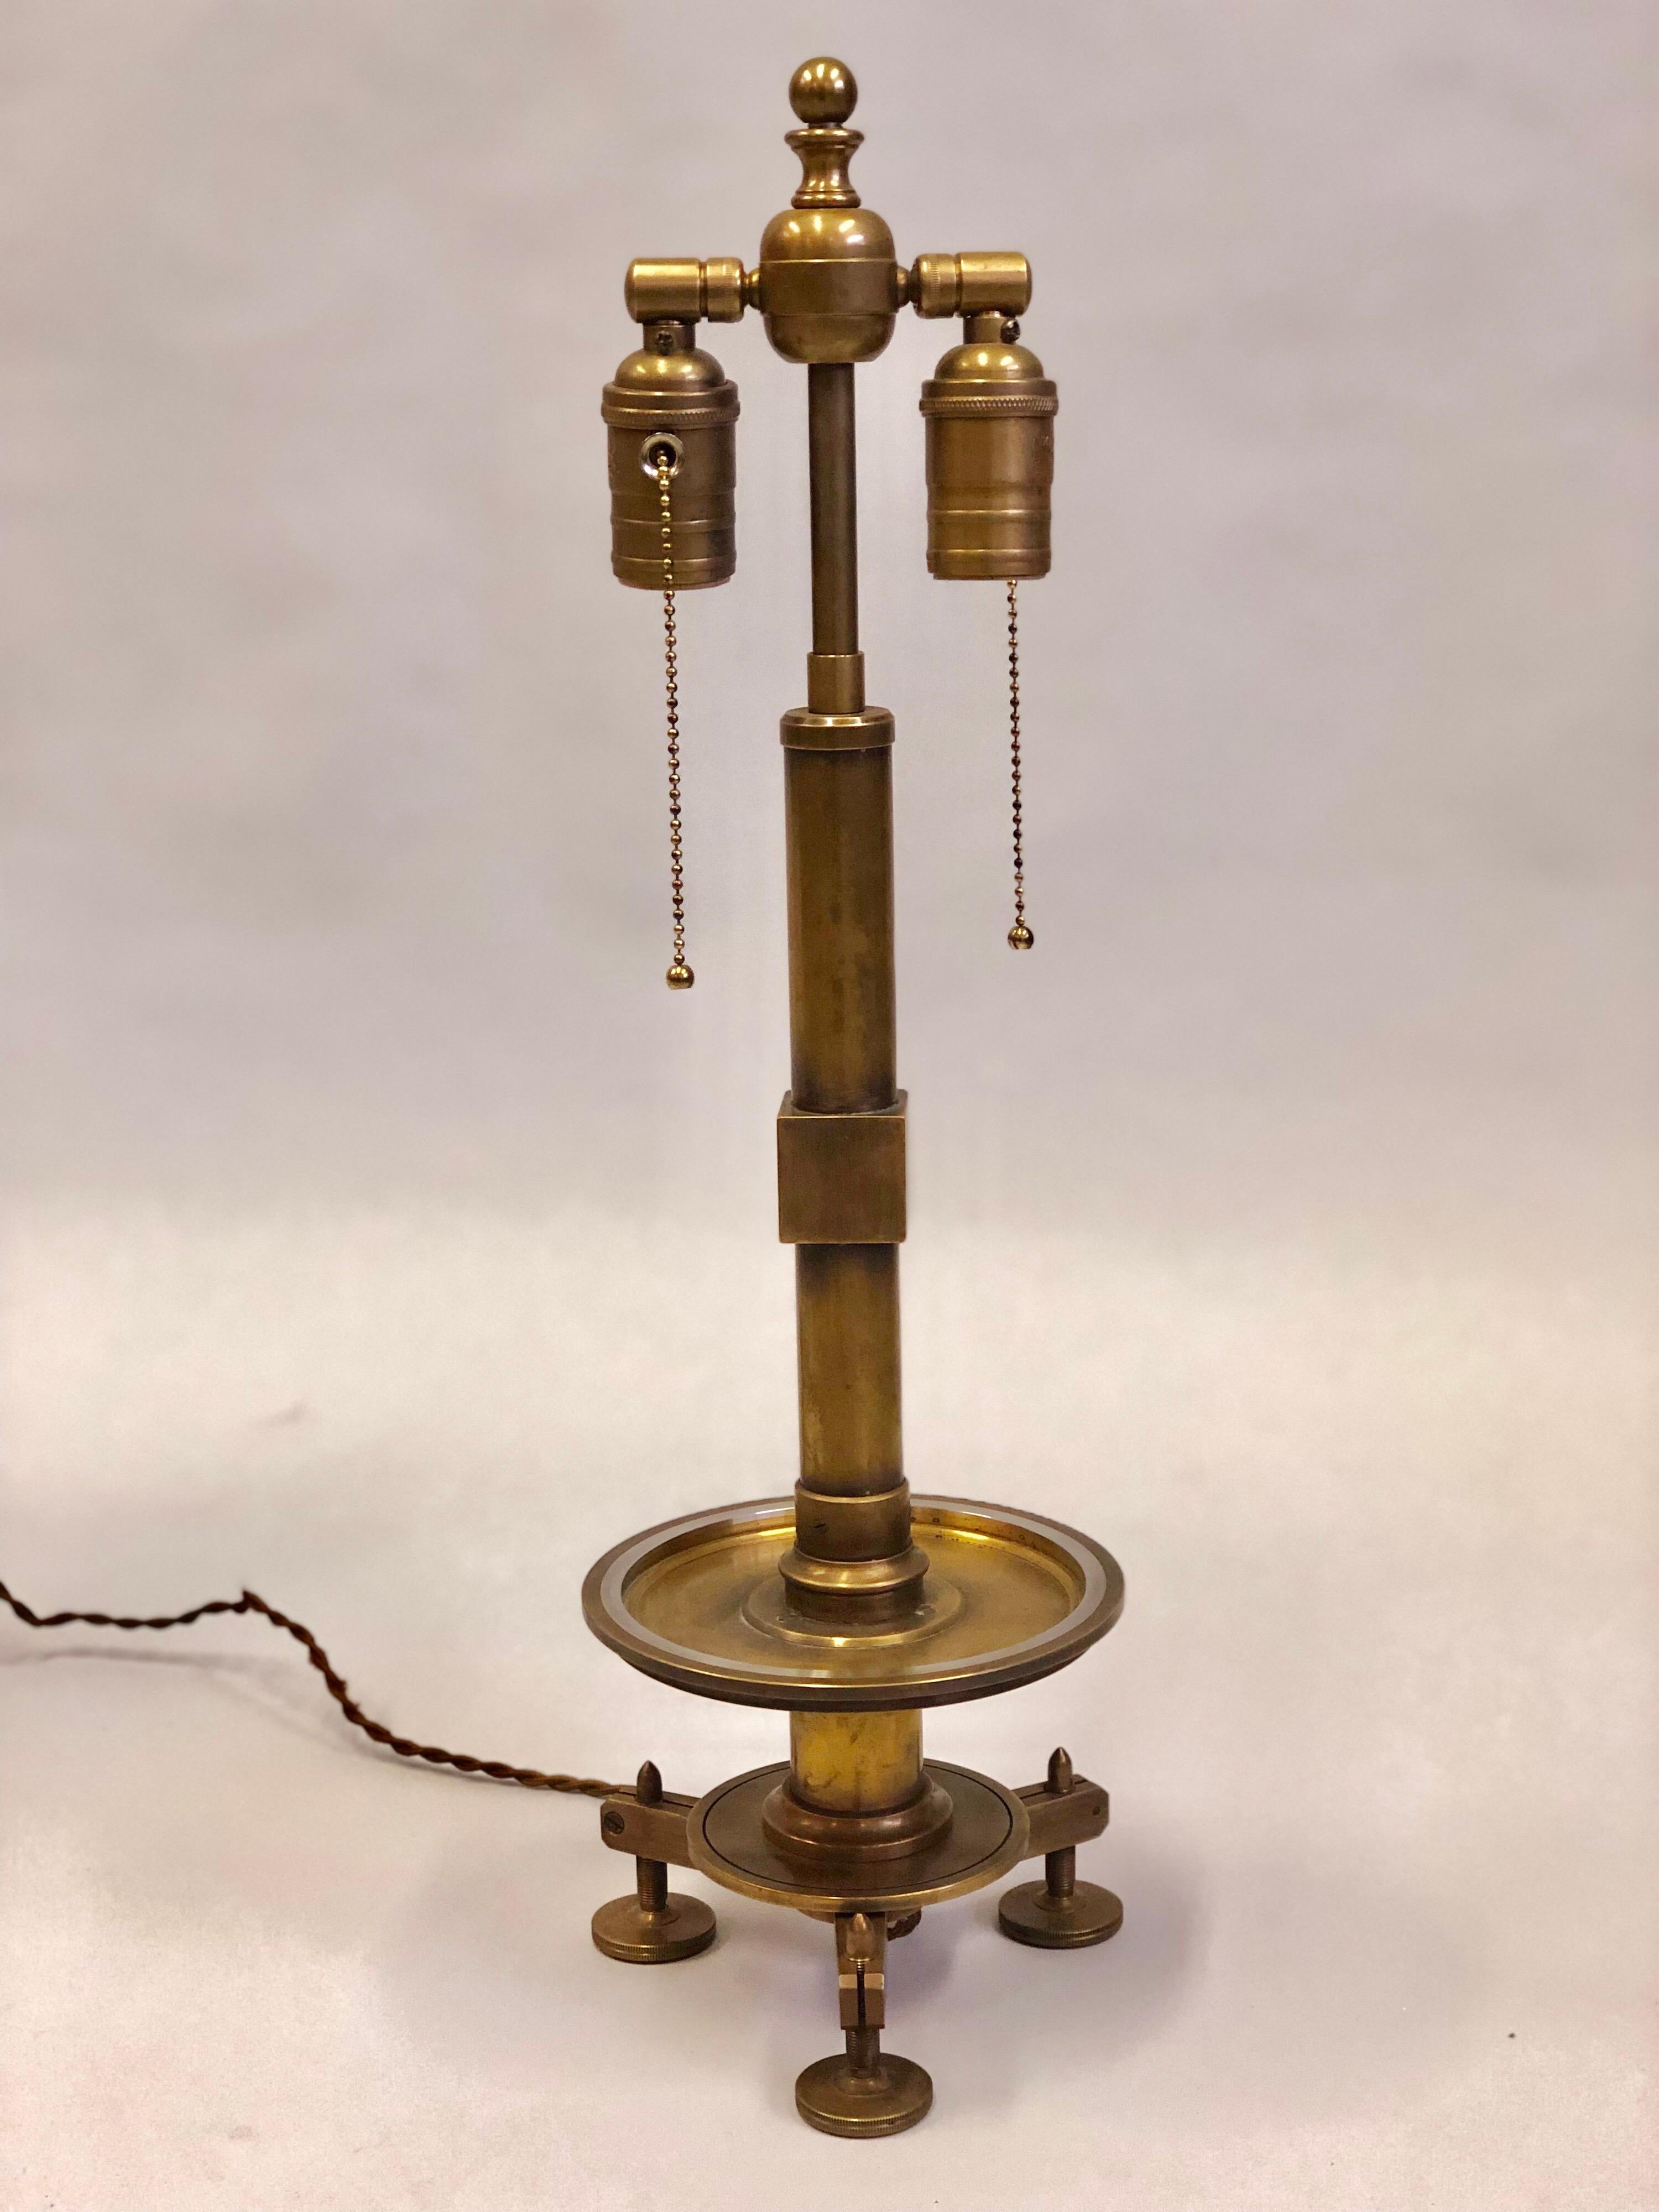 Elegant pair of French Modern Neoclassical brass and steel industrial style table lamps. The lamps are elegantly conceived within the framework of chic modern neoclassical forms but actualized with brass and steel industrial detailing to achieve a.